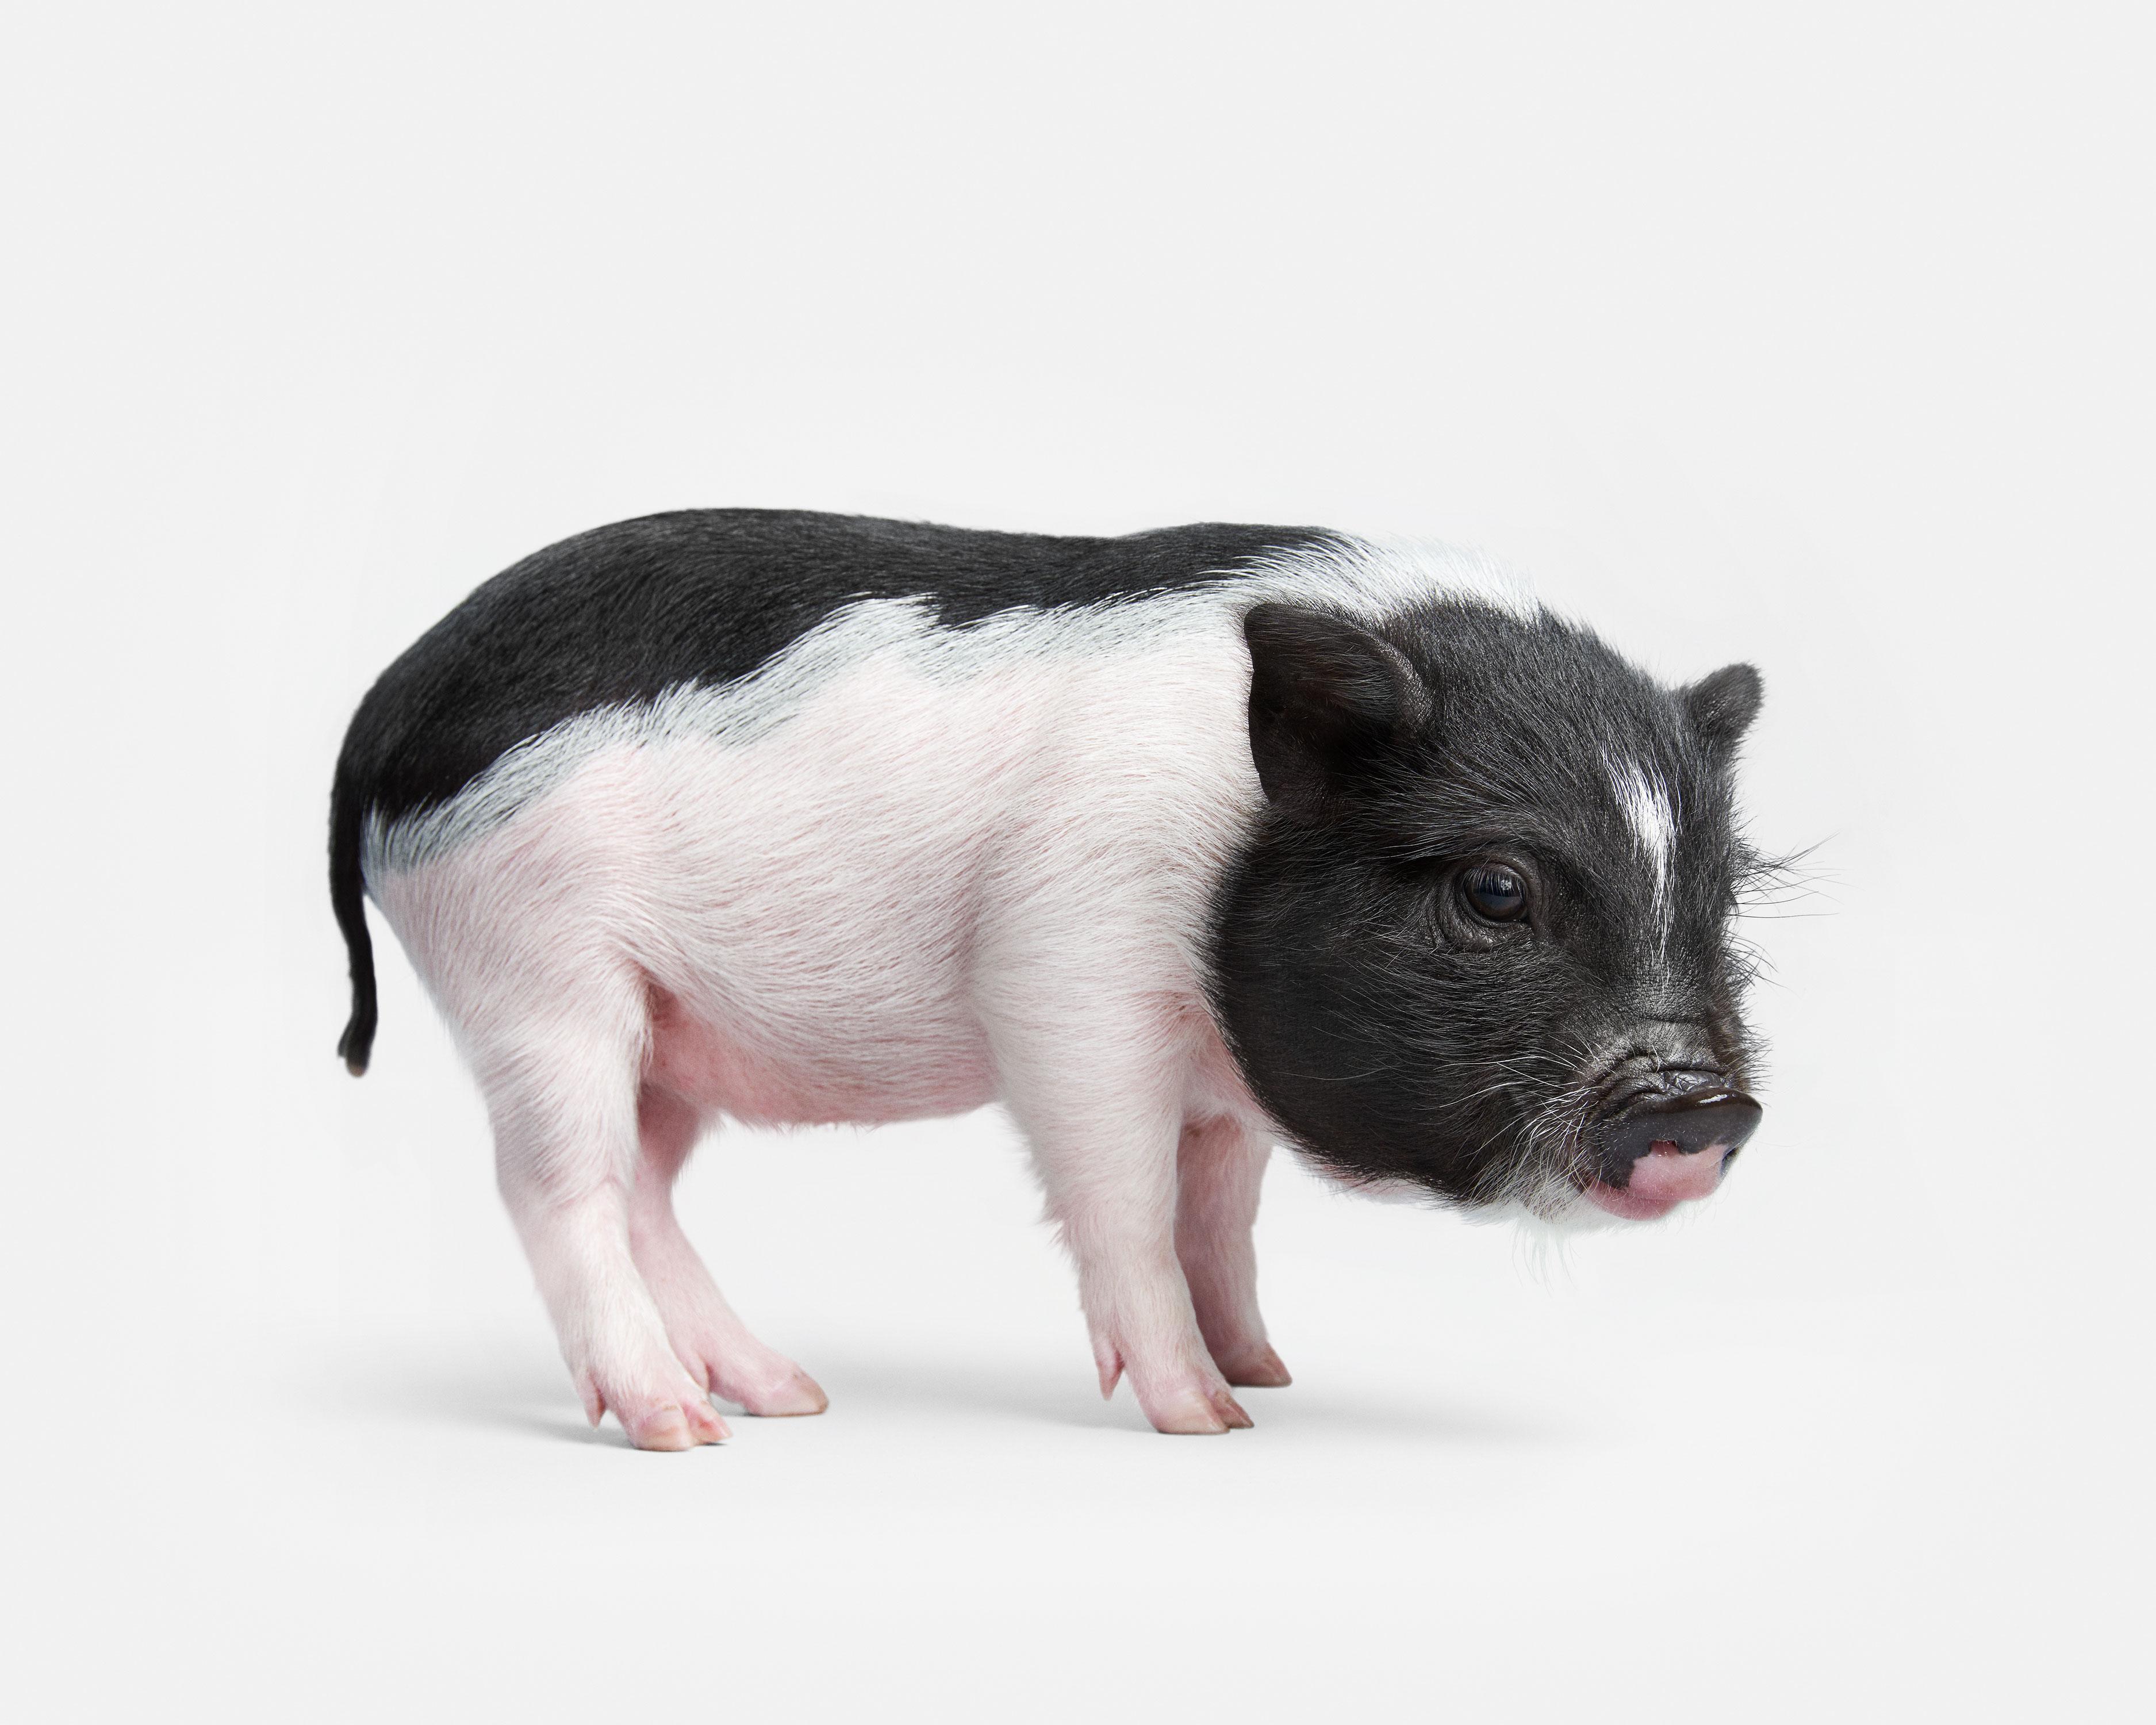 Randal Ford Color Photograph - Pot Bellied Piglet (30" x 37.5")